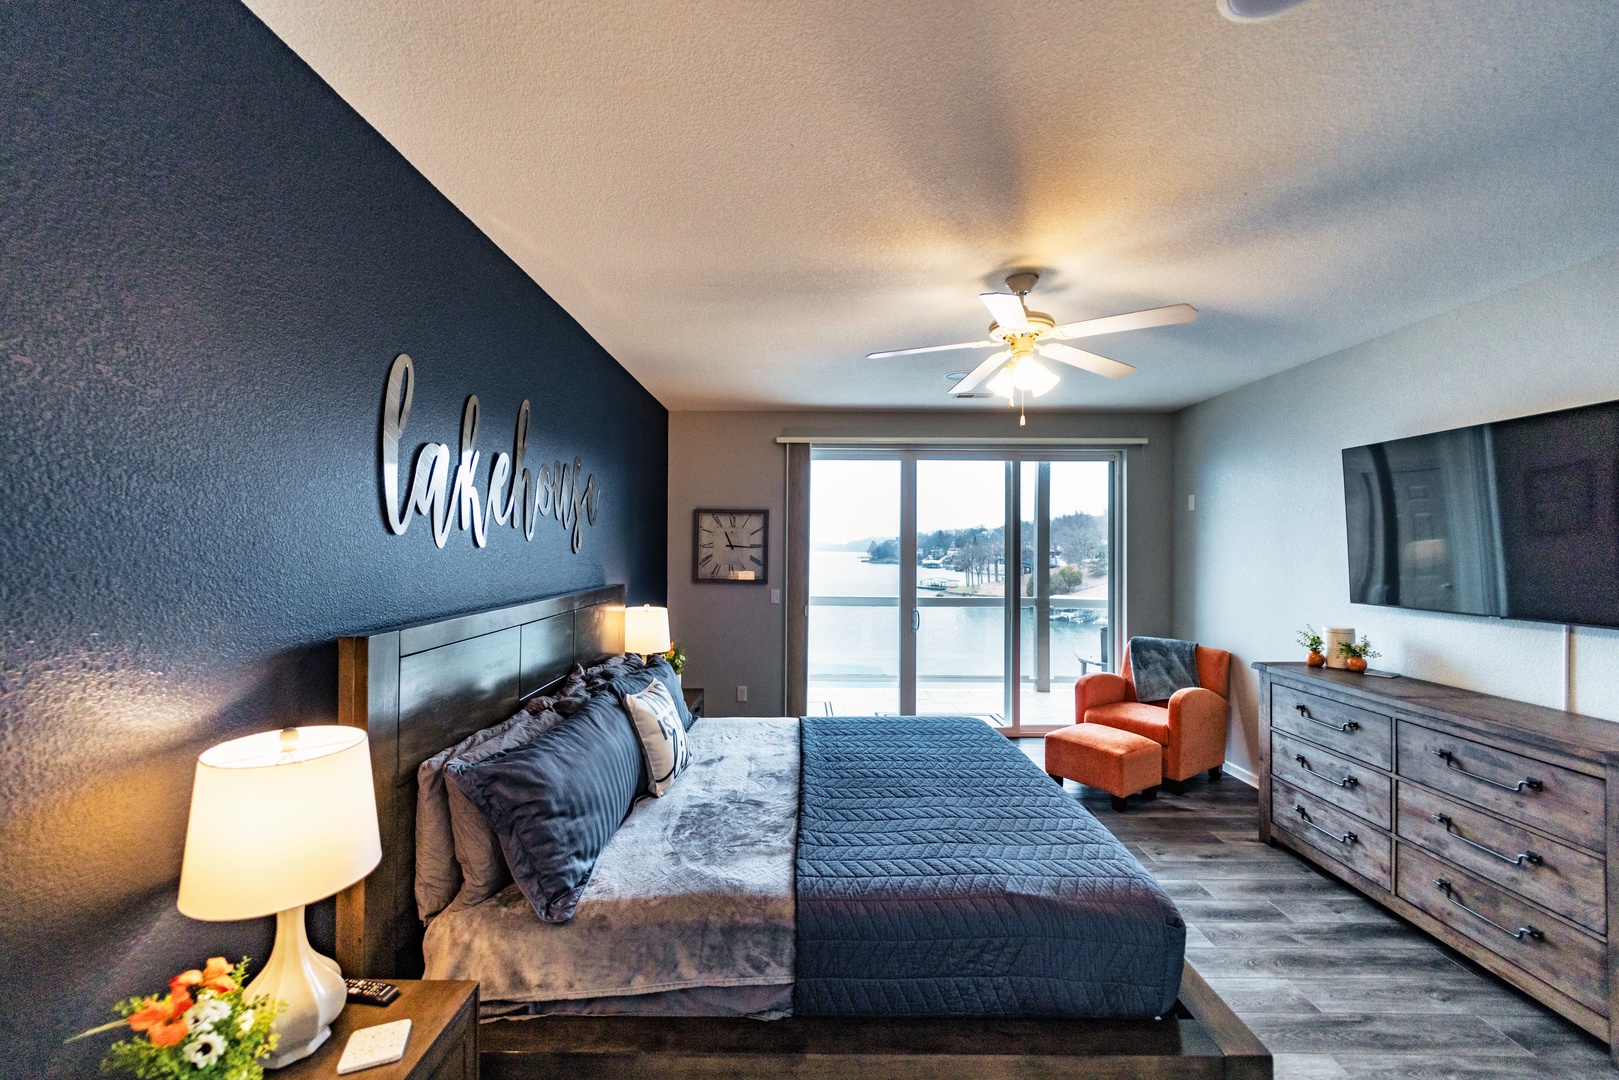 The master suite boasts a king bed, private ensuite, TV, & balcony access